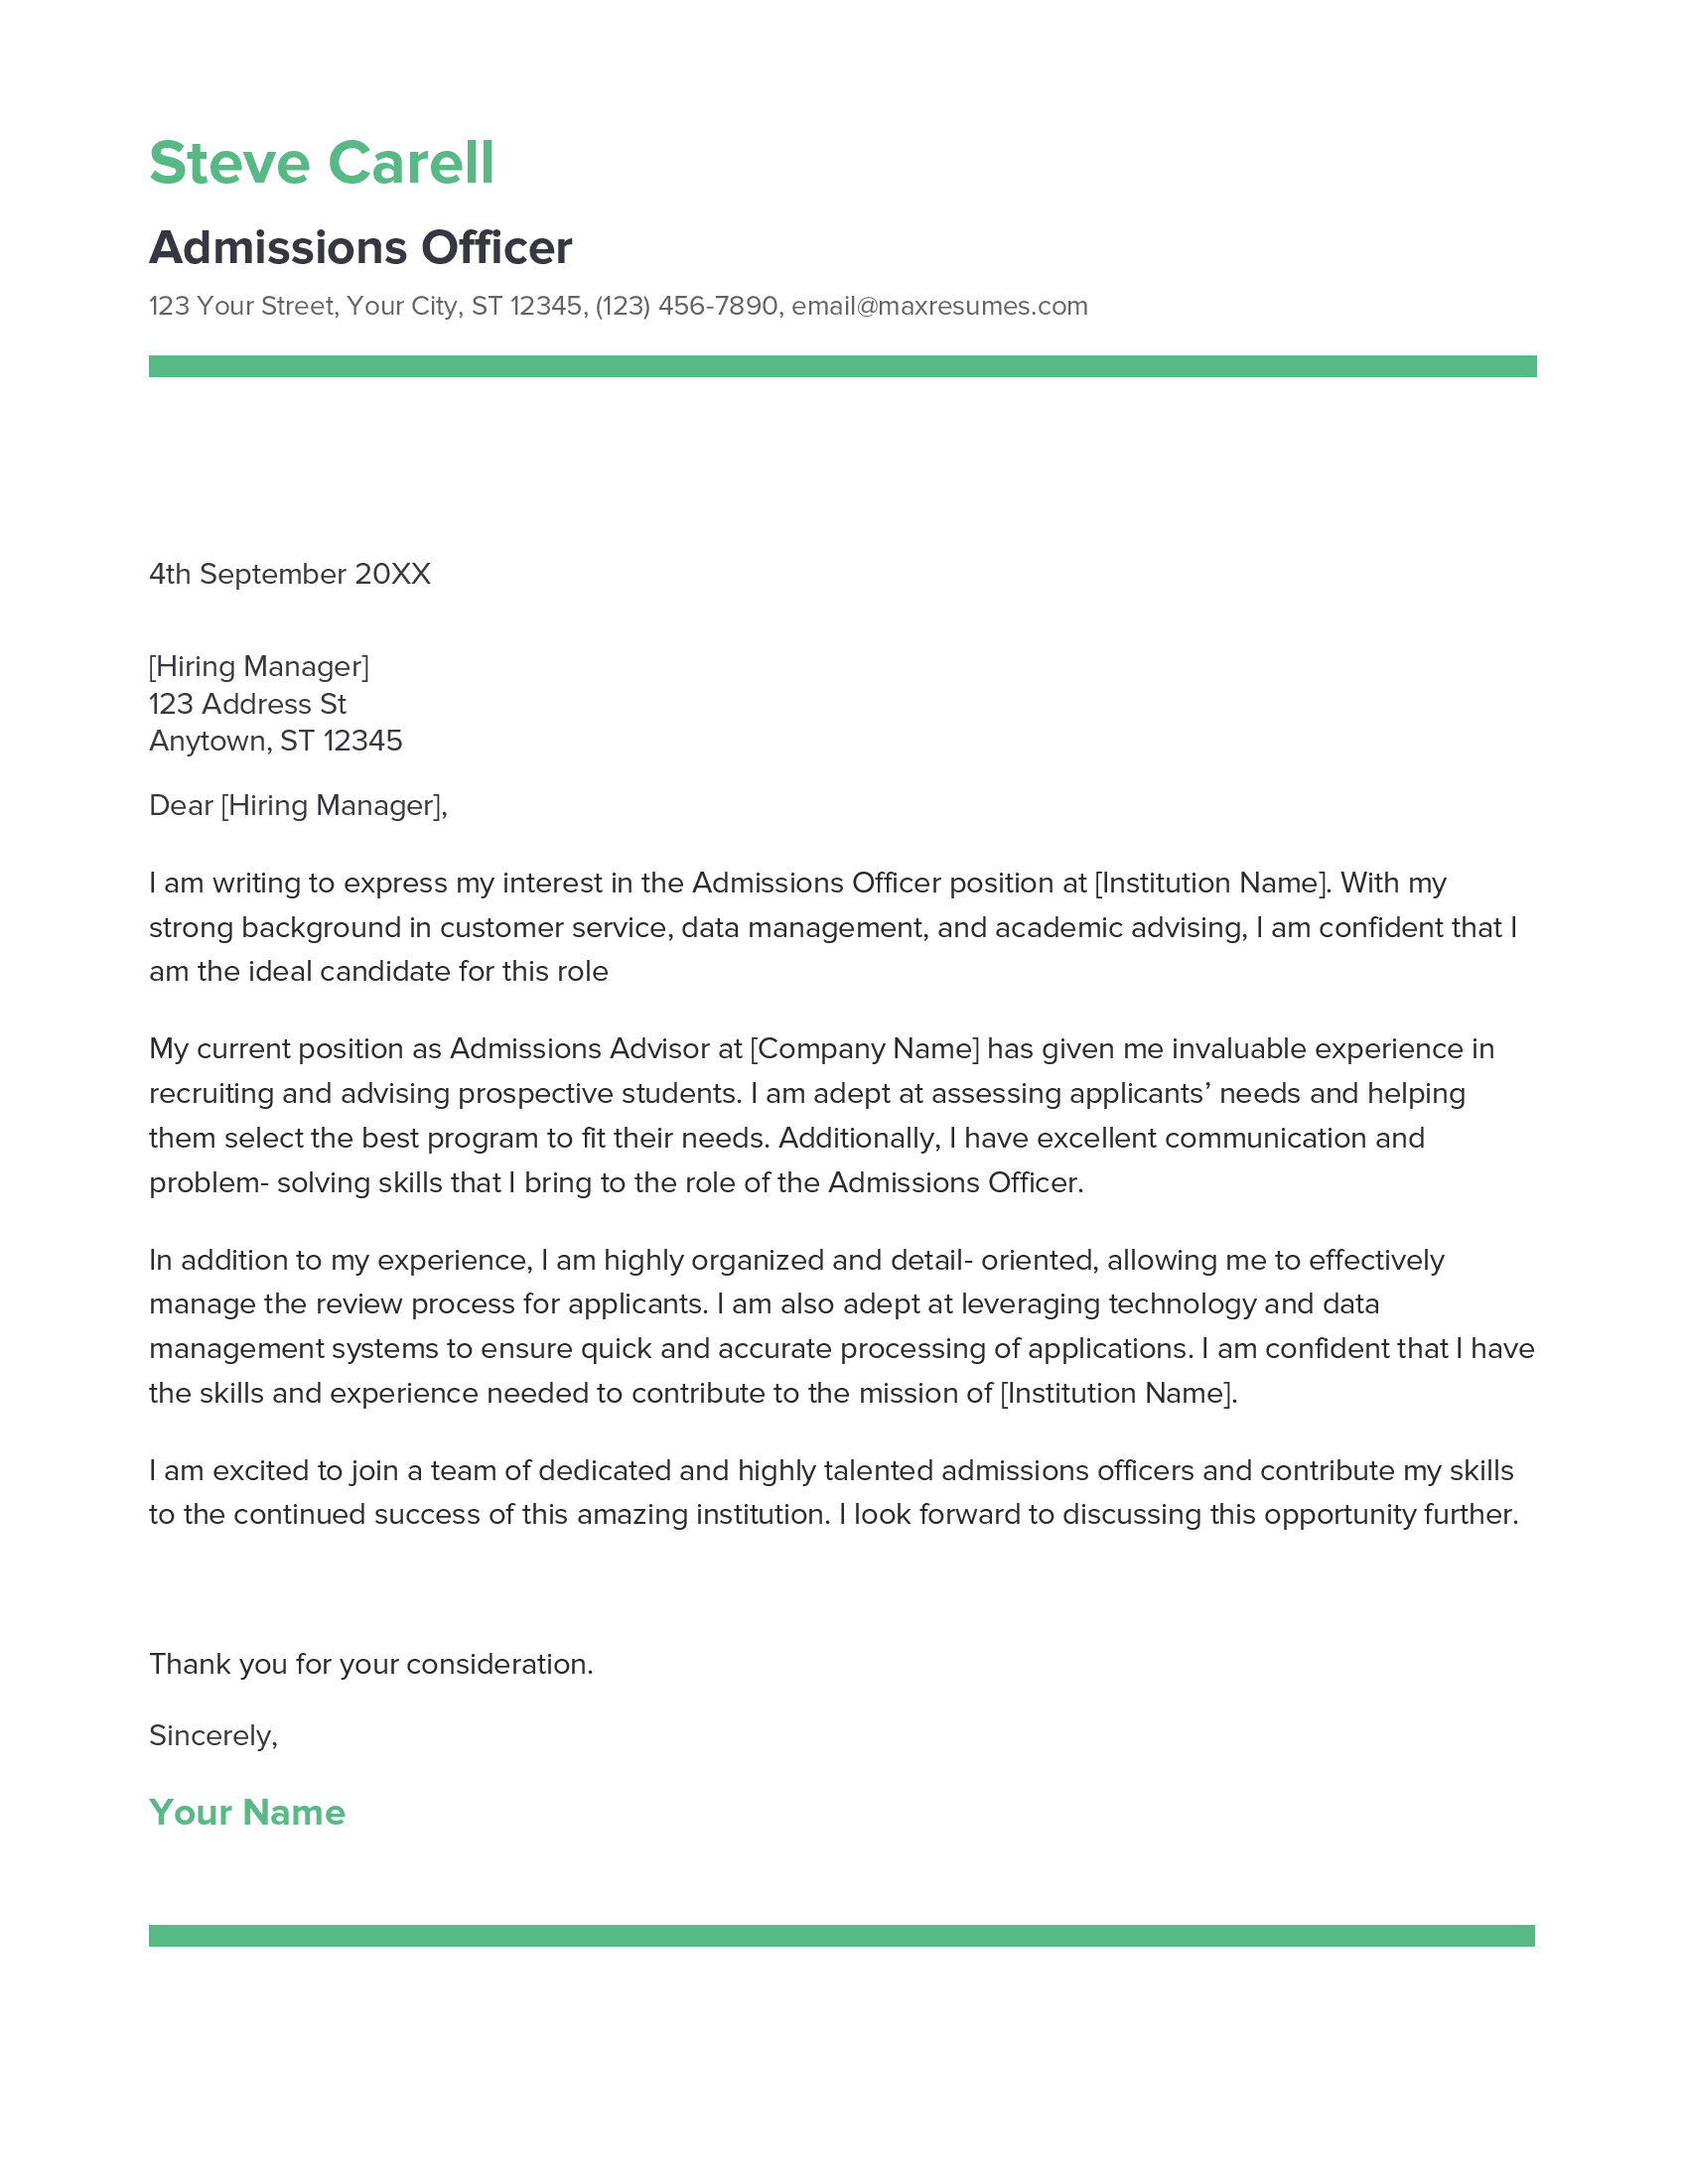 law school admissions cover letter